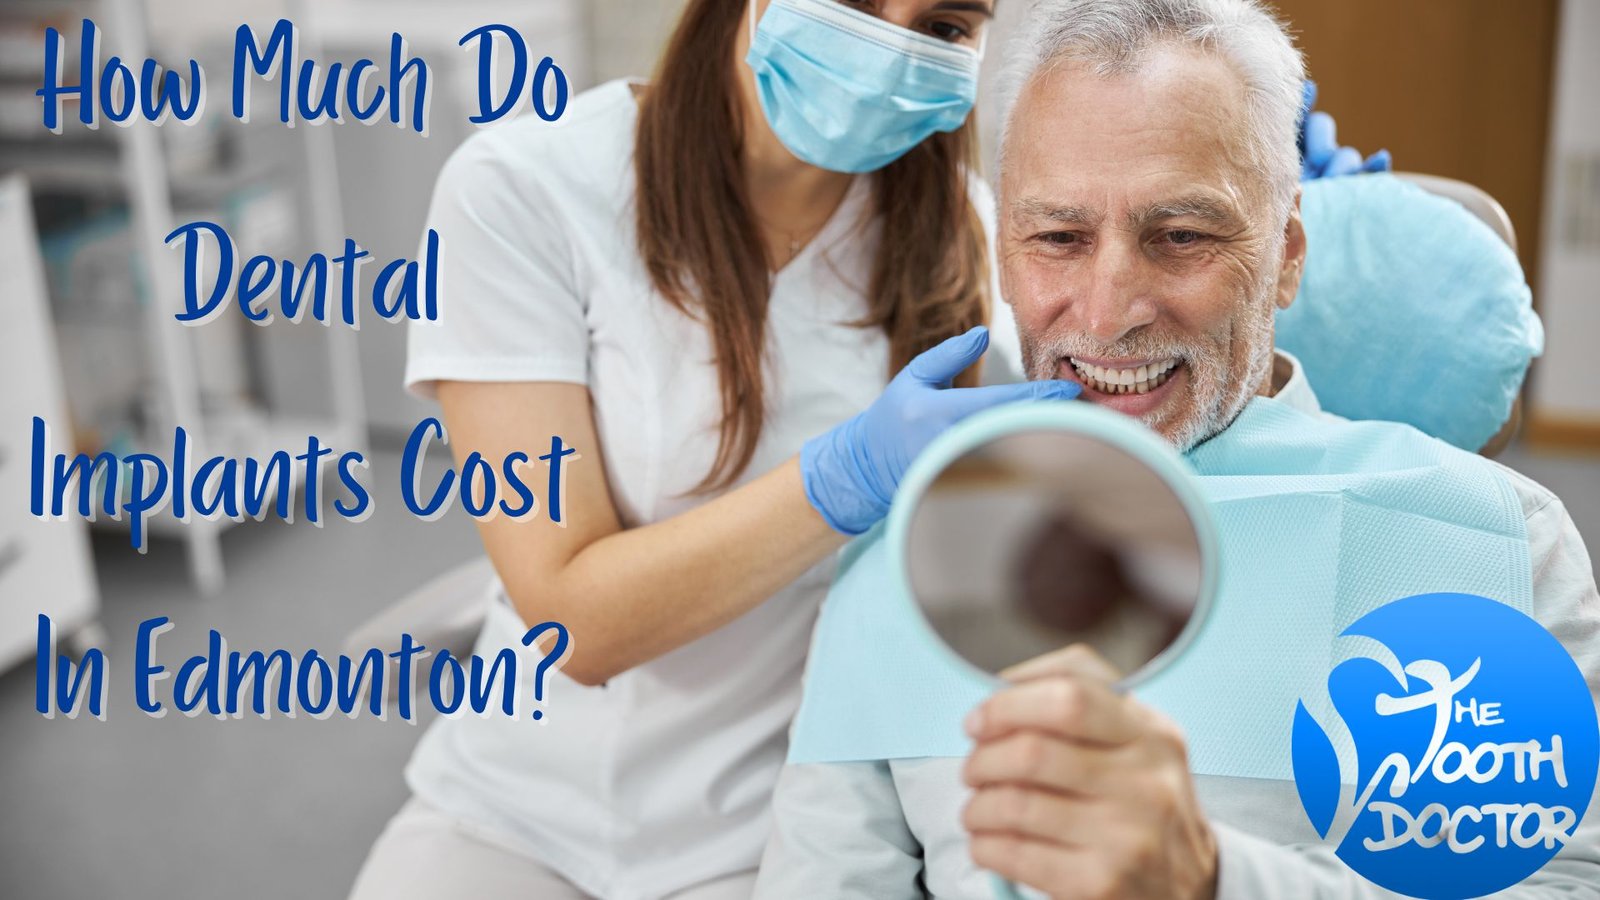 How Much Do Dental Implants Cost In Edmonton?